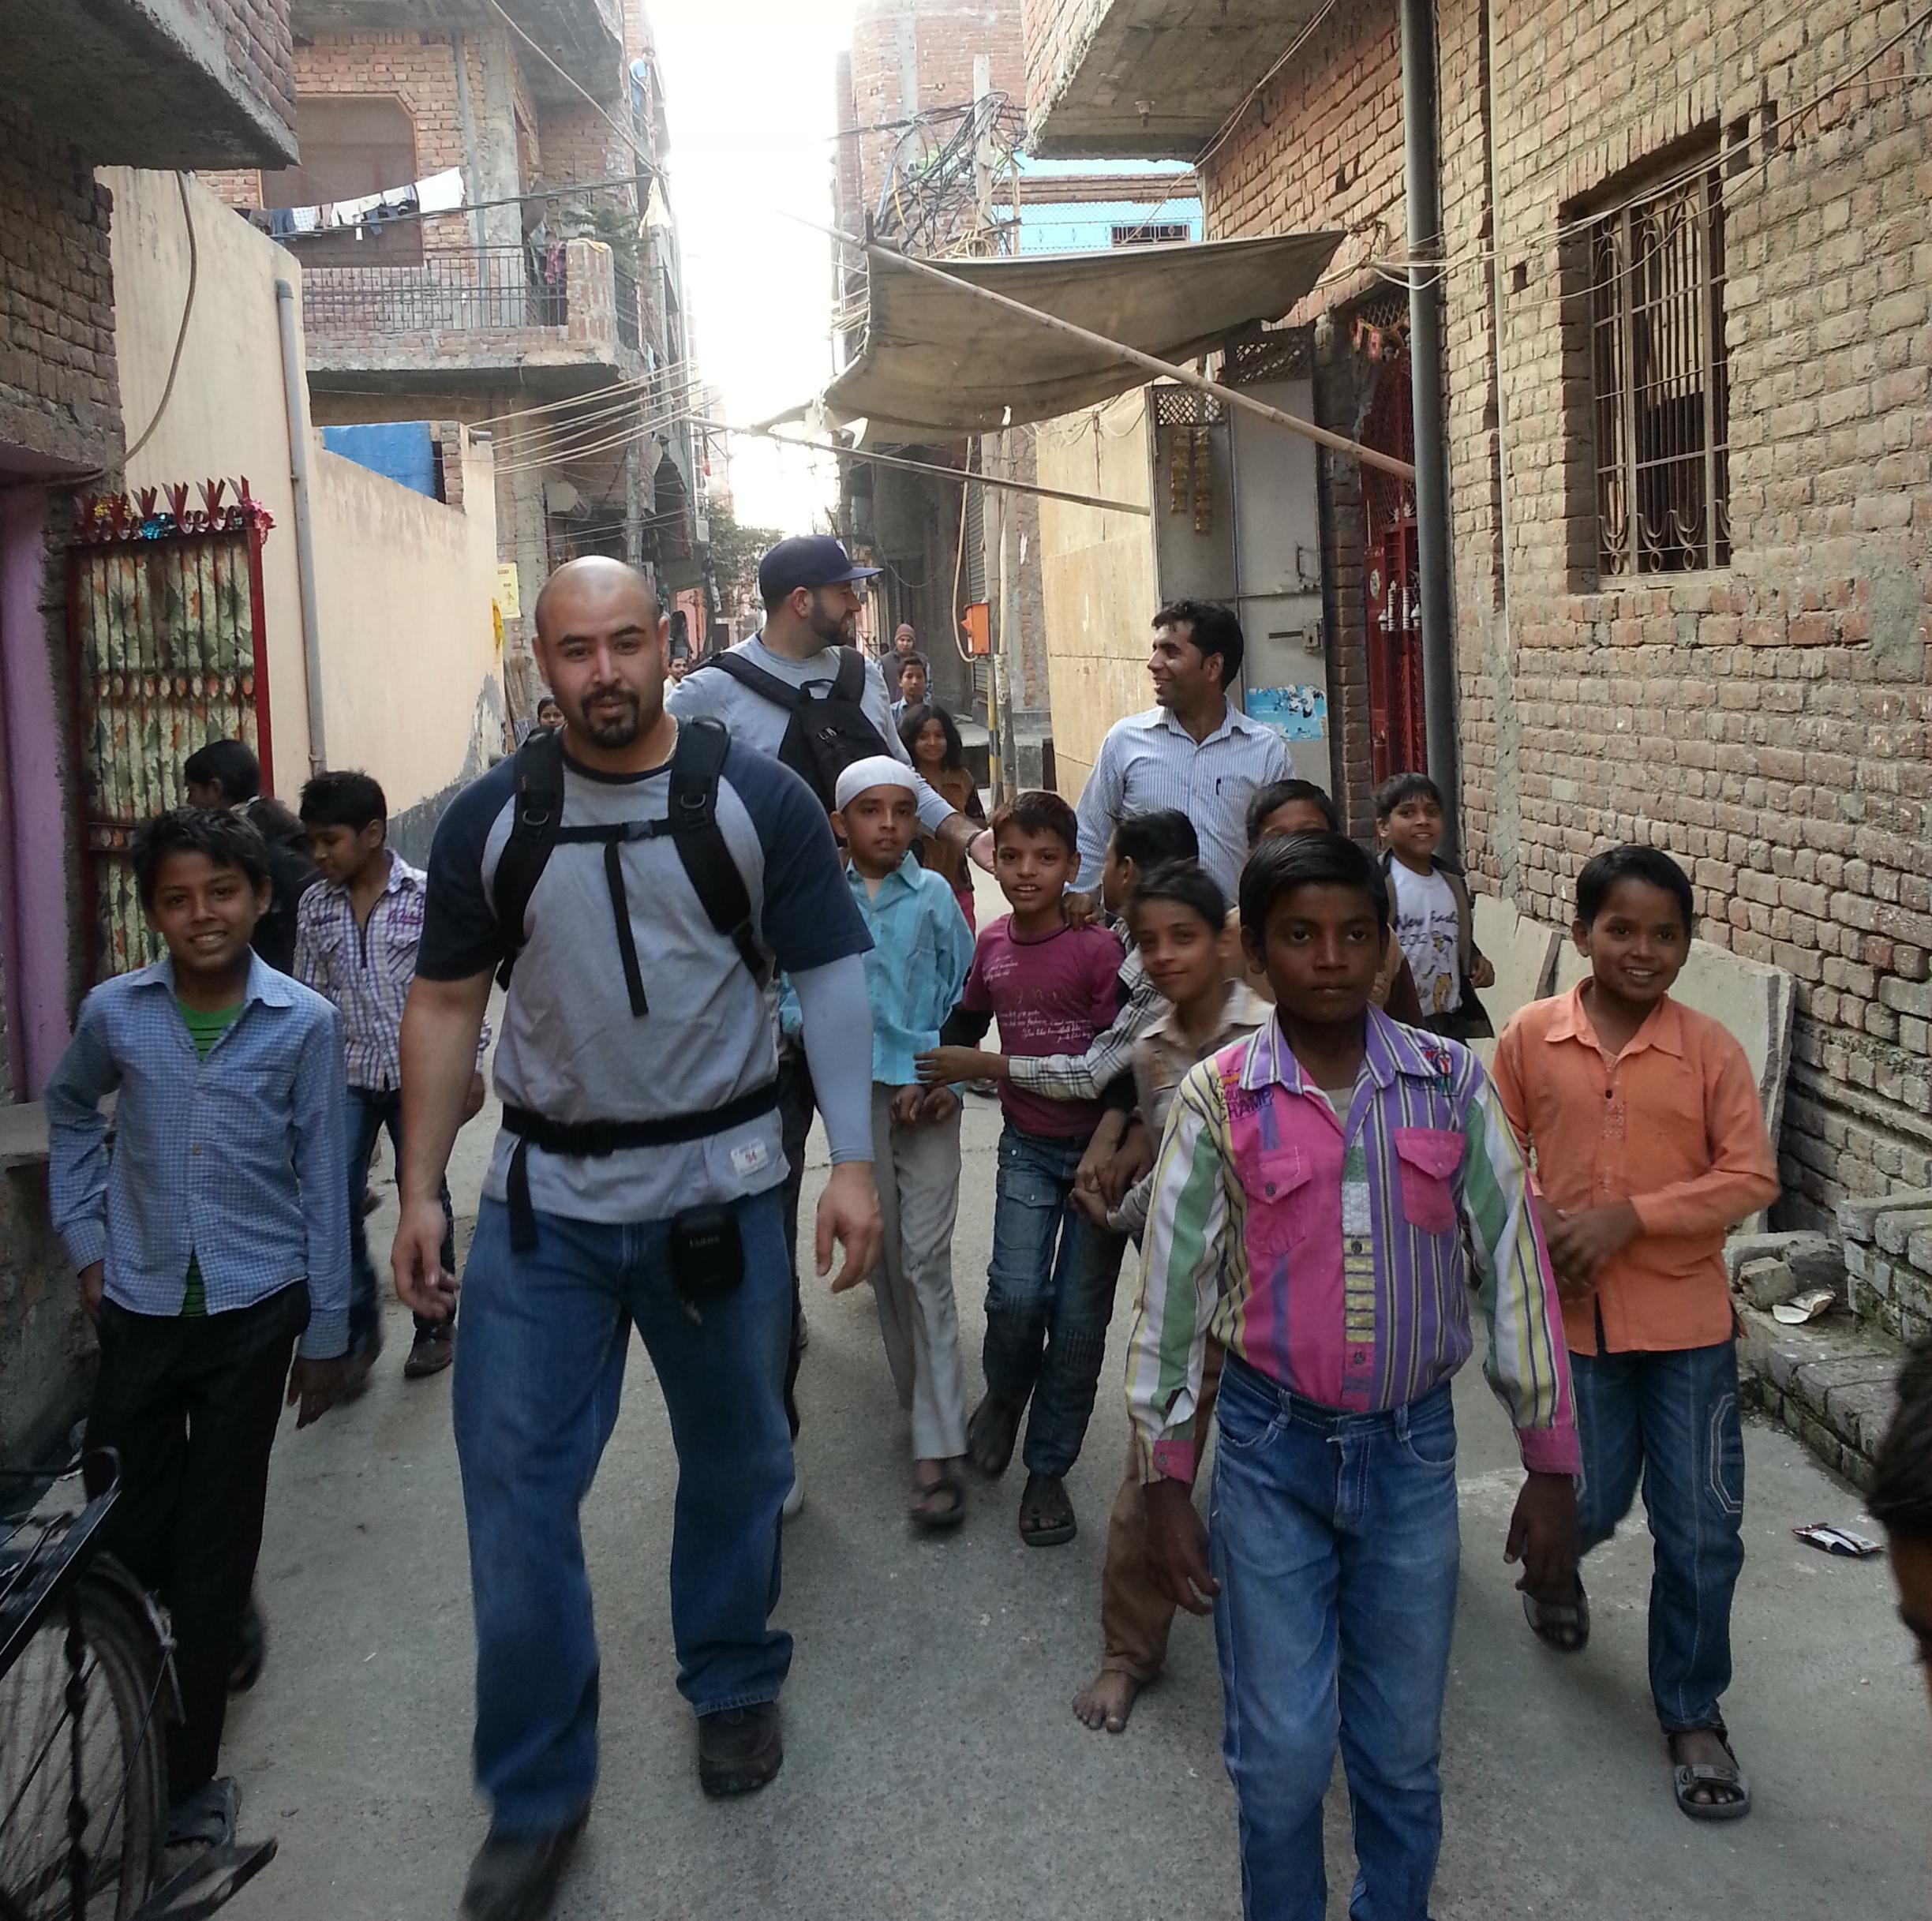 Touro College of Pharmacy students travel to India to provide healthcare in the slums.